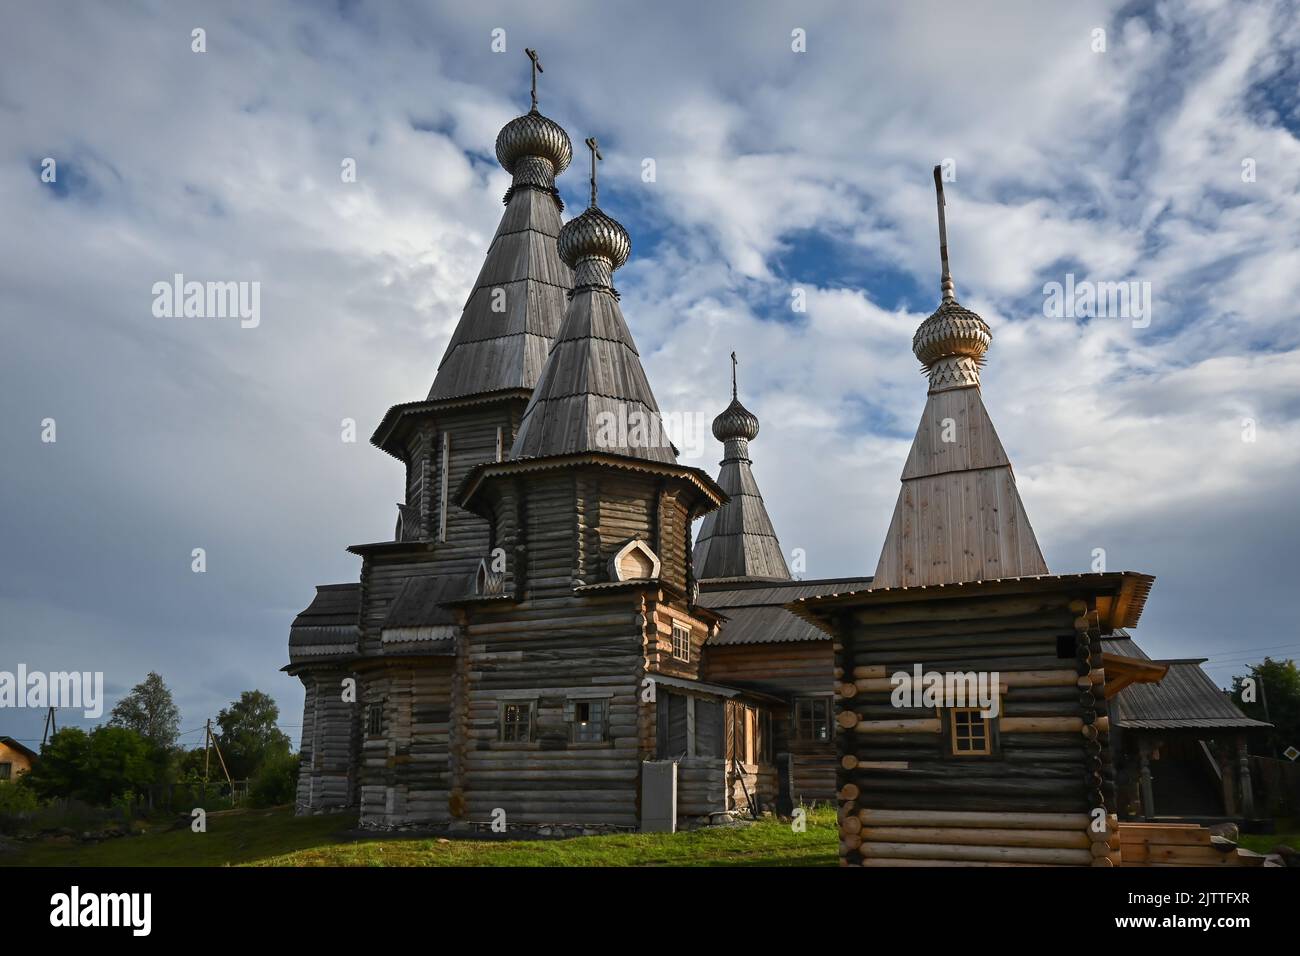 Wooden Orthodox church. Church of the Assumption of the Blessed Virgin Mary in the city of Kem, Republic of Karelia, Russia. Stock Photo